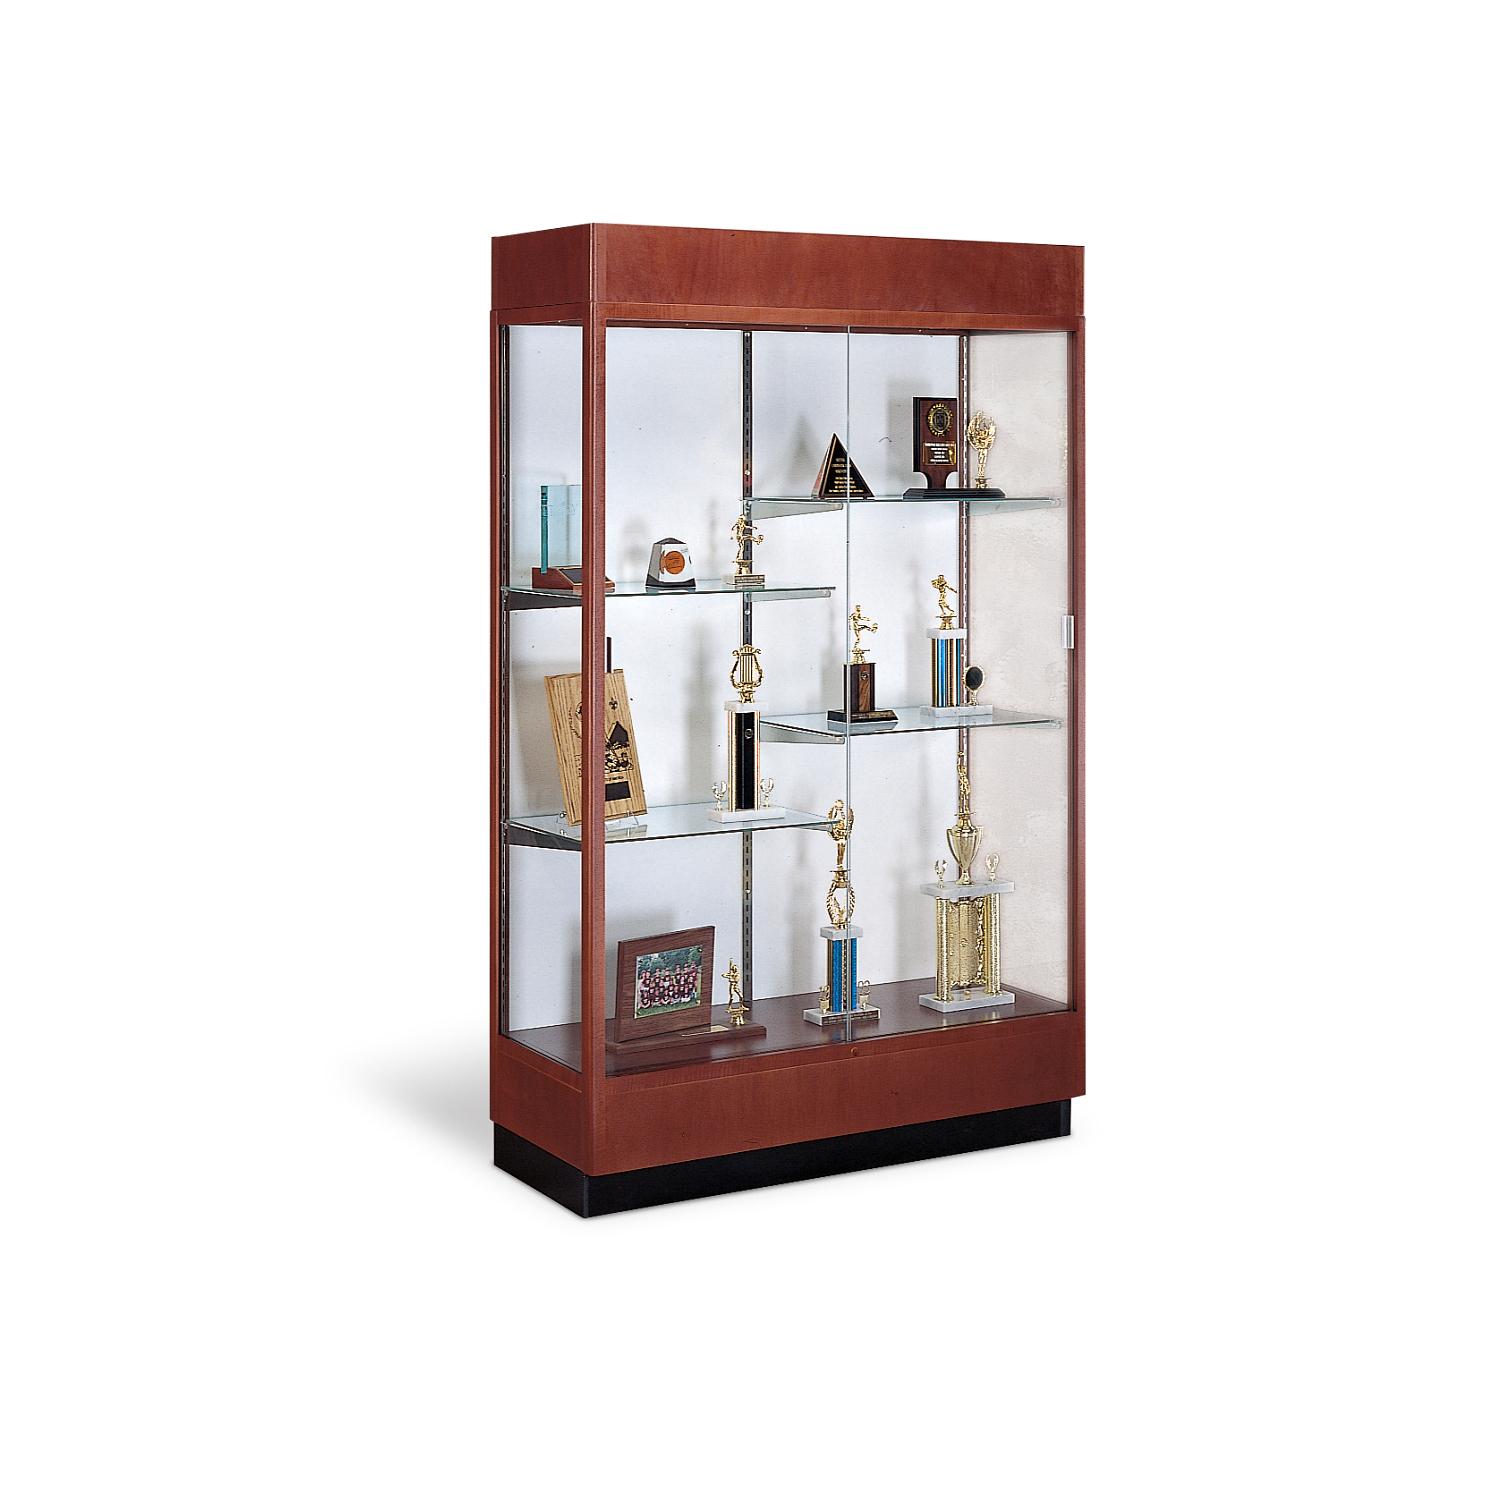 Lighted Display Cases